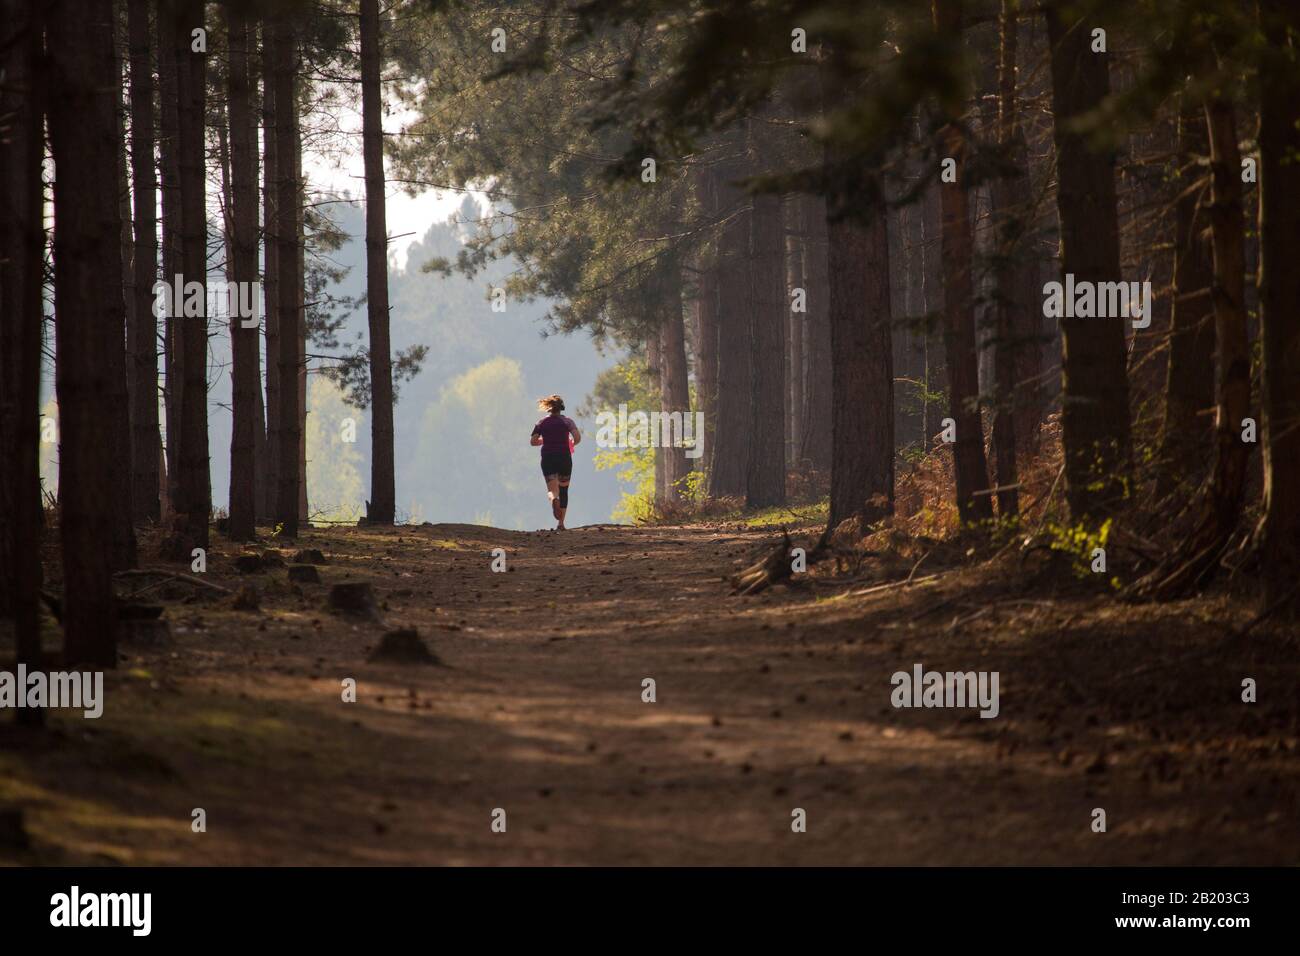 Girl jogging in the sunlit forest Stock Photo